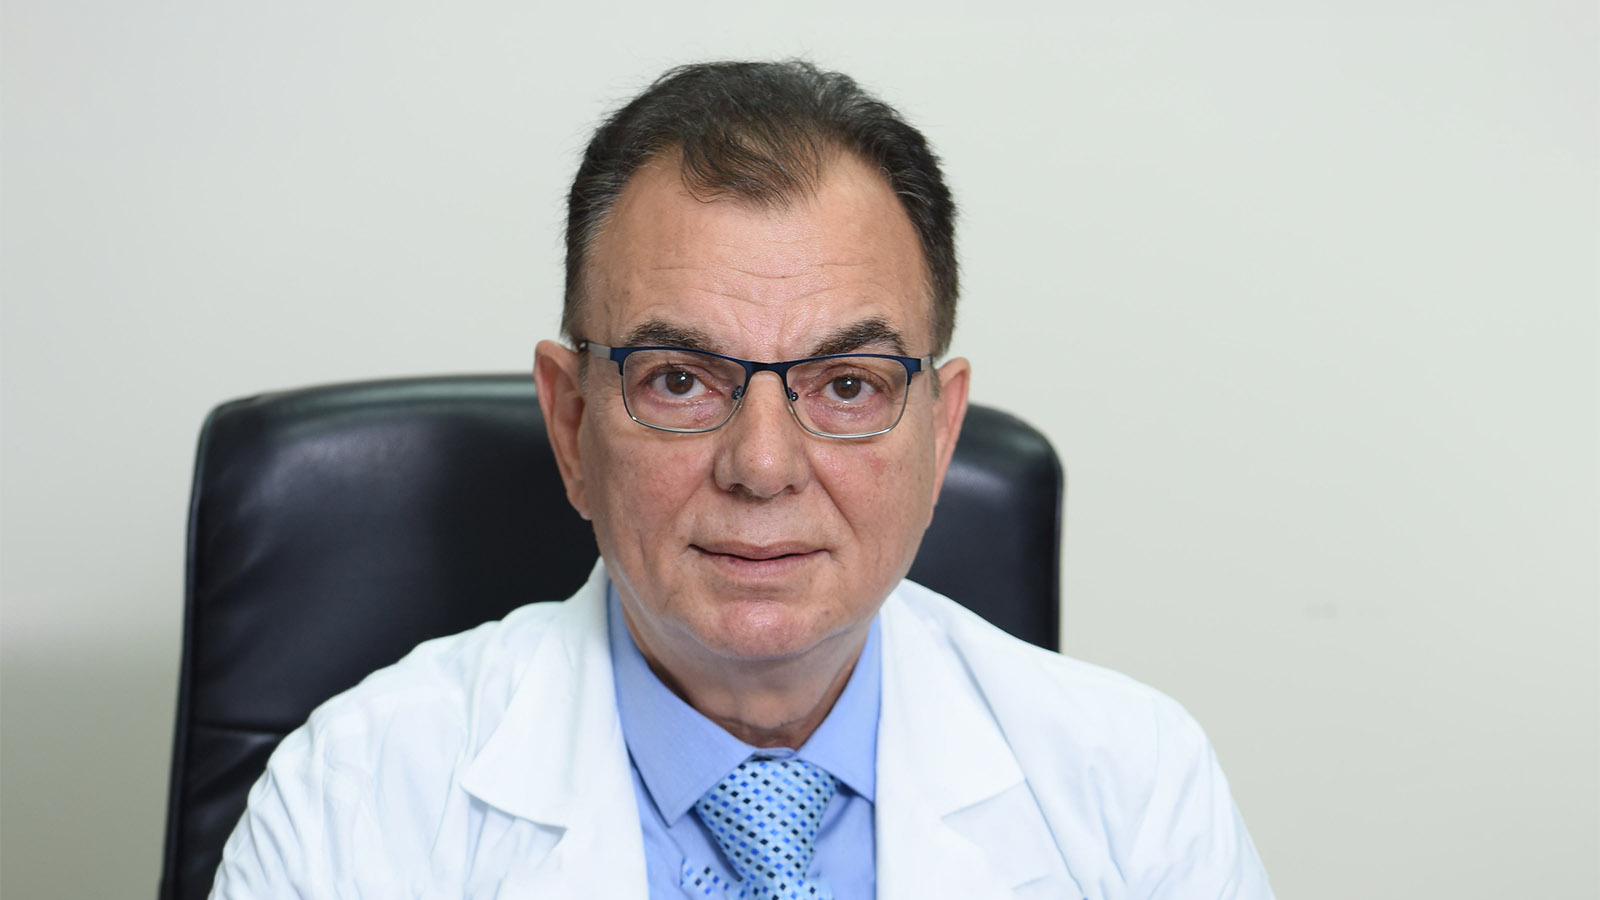 Chairman of the Medical Association Zion Hagay: &quot;The virus does not differentiate between a hospital doctor and a doctor in kupat cholim.&quot; (Photograph: Itzik Biran)